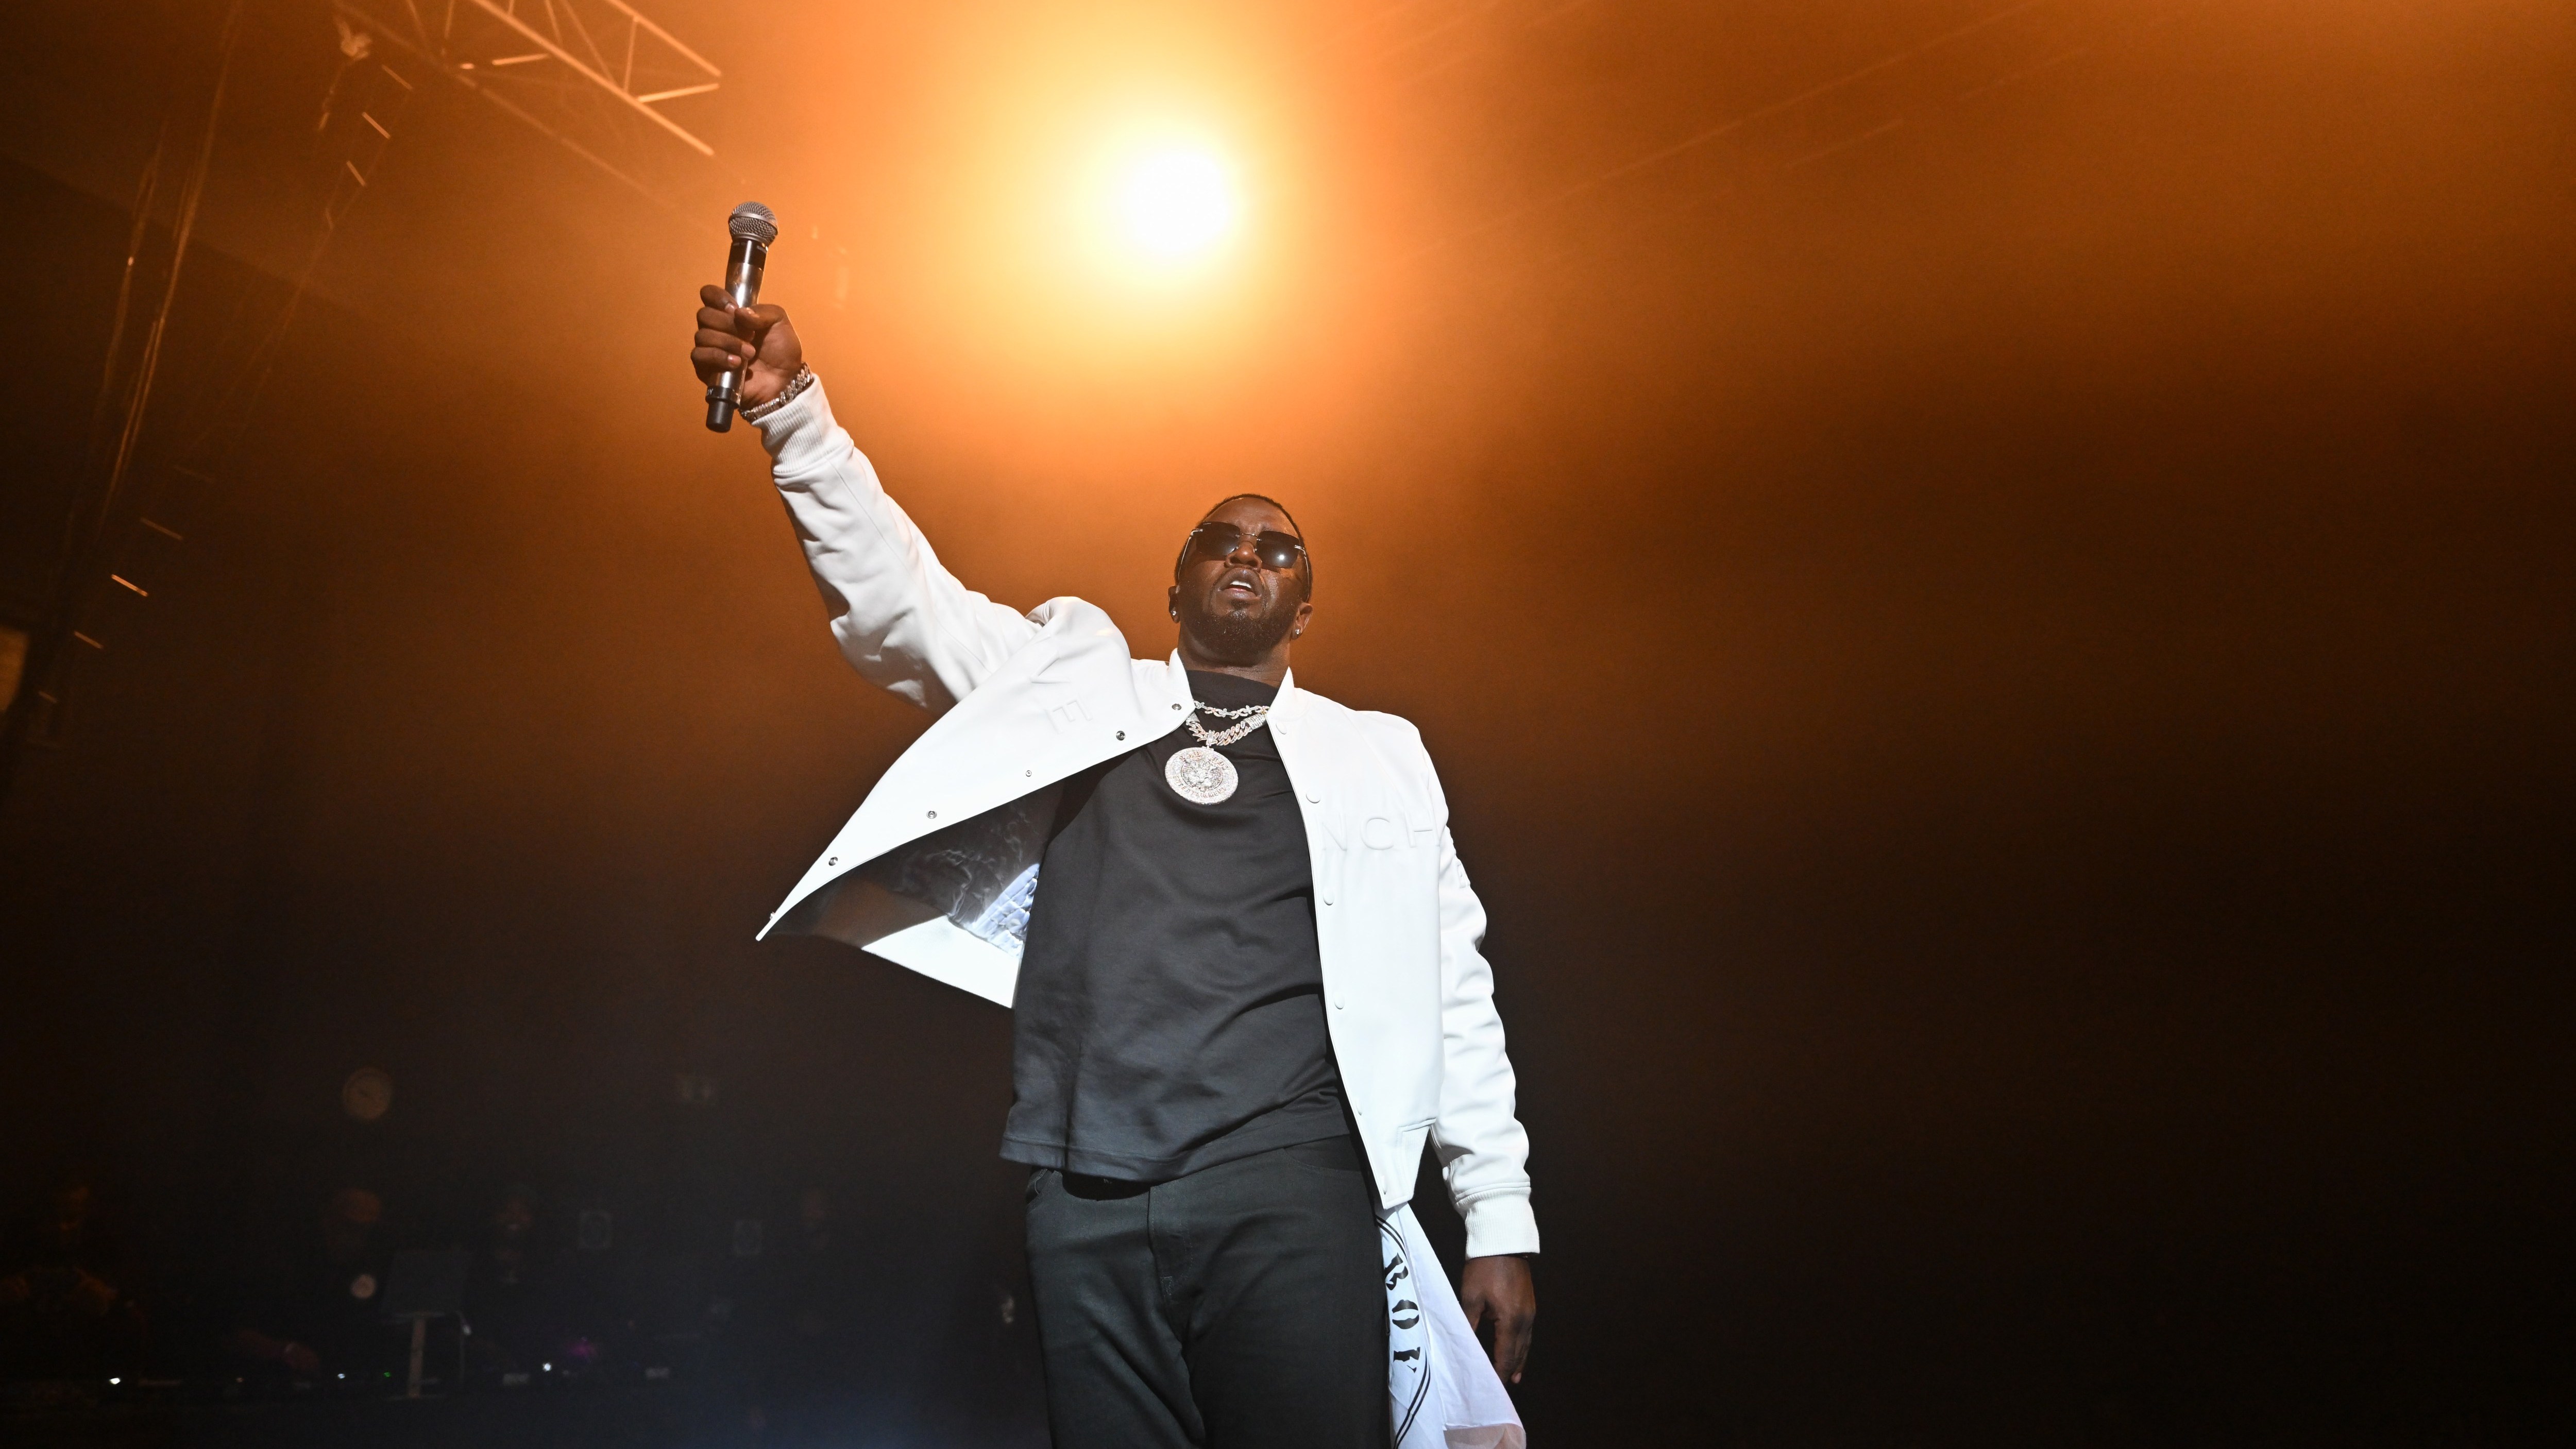 Is it over for Diddy, rapper turned billionaire businessman?